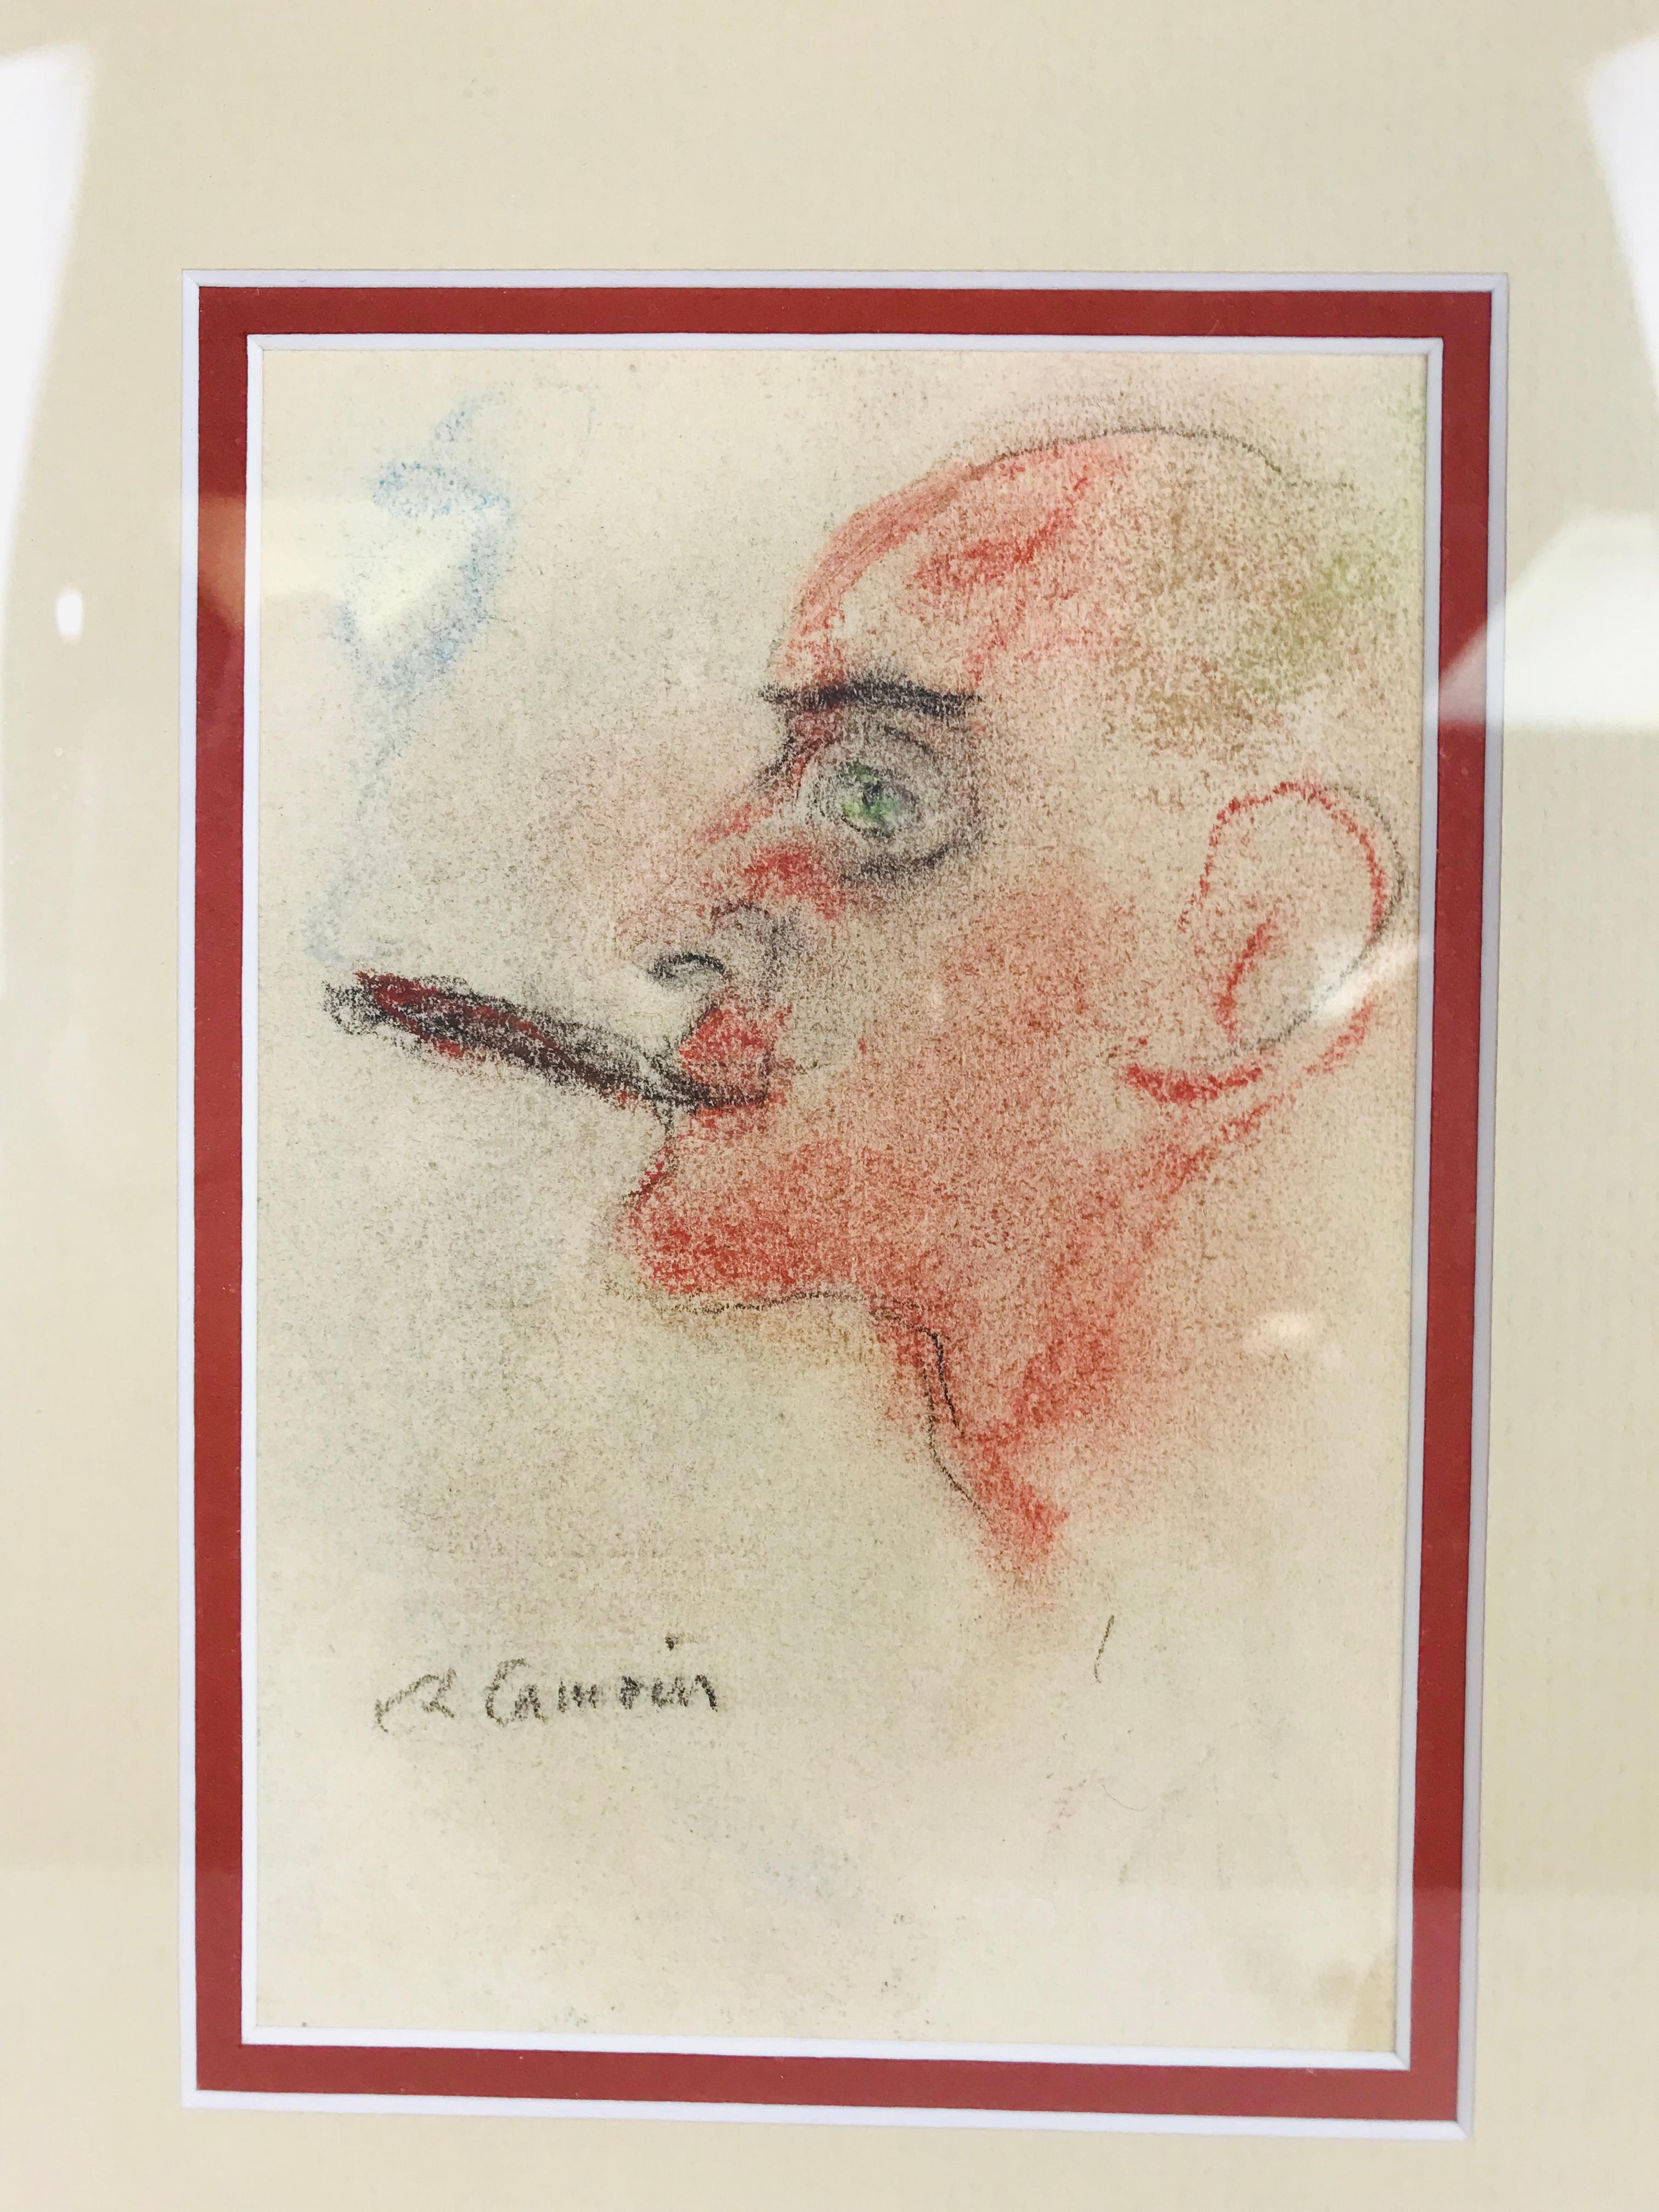 A Classic sketch by Charles Camoin (1879-1965, France) in a beautiful gold frame. A light use of pencil and pastel and cloud-like blending between the two mediums. A faint lack of definition gives this sketch a fading look as if what's the now can